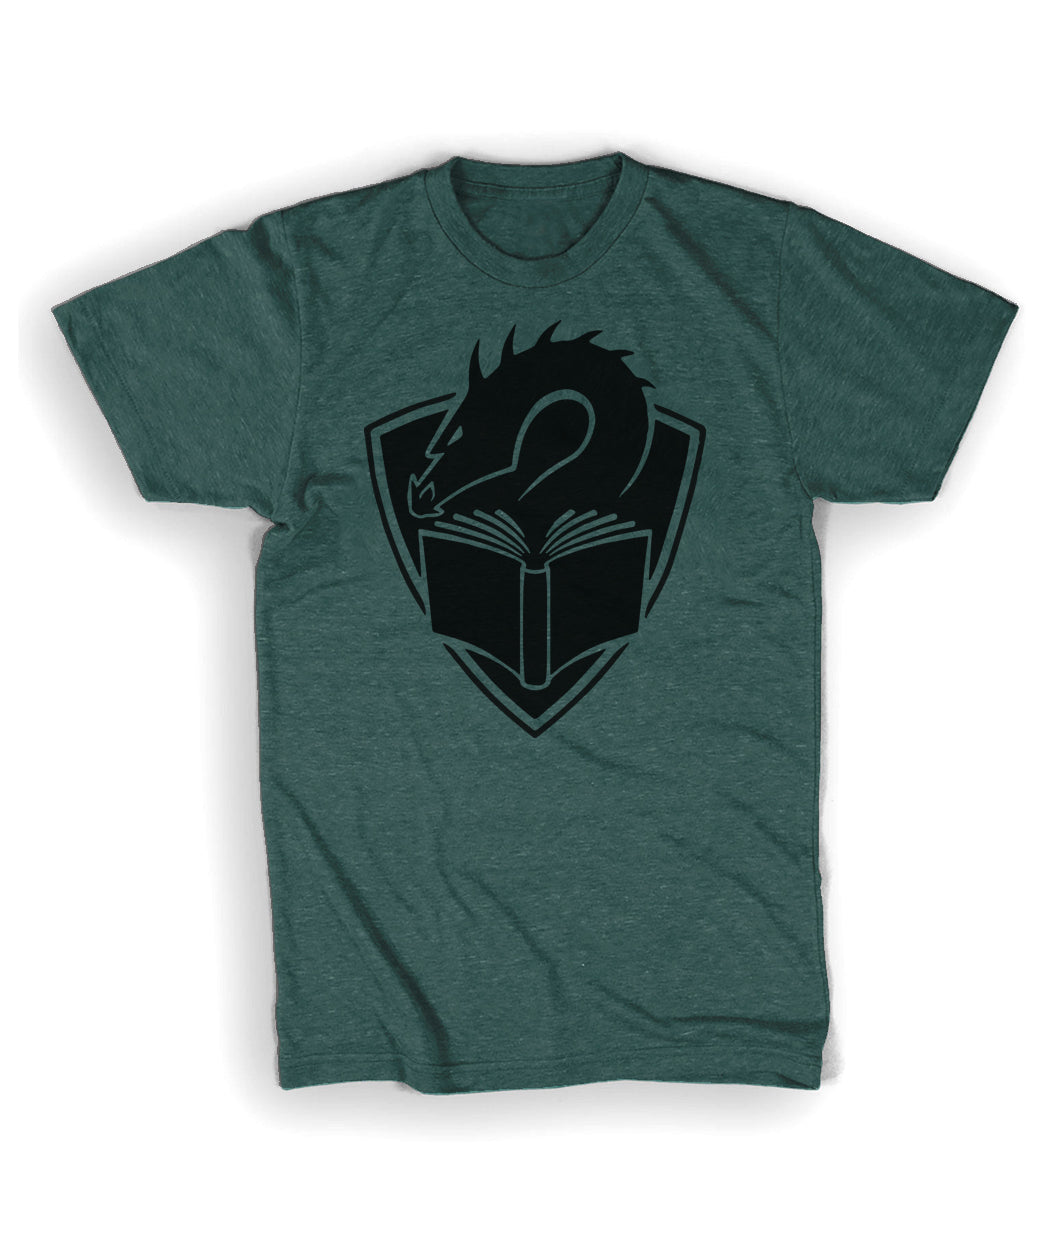 A tealish green colored t-shirt with a centered large black illustration of a dragon's head peering at the pages of an open book, with a crest shape in the background. 